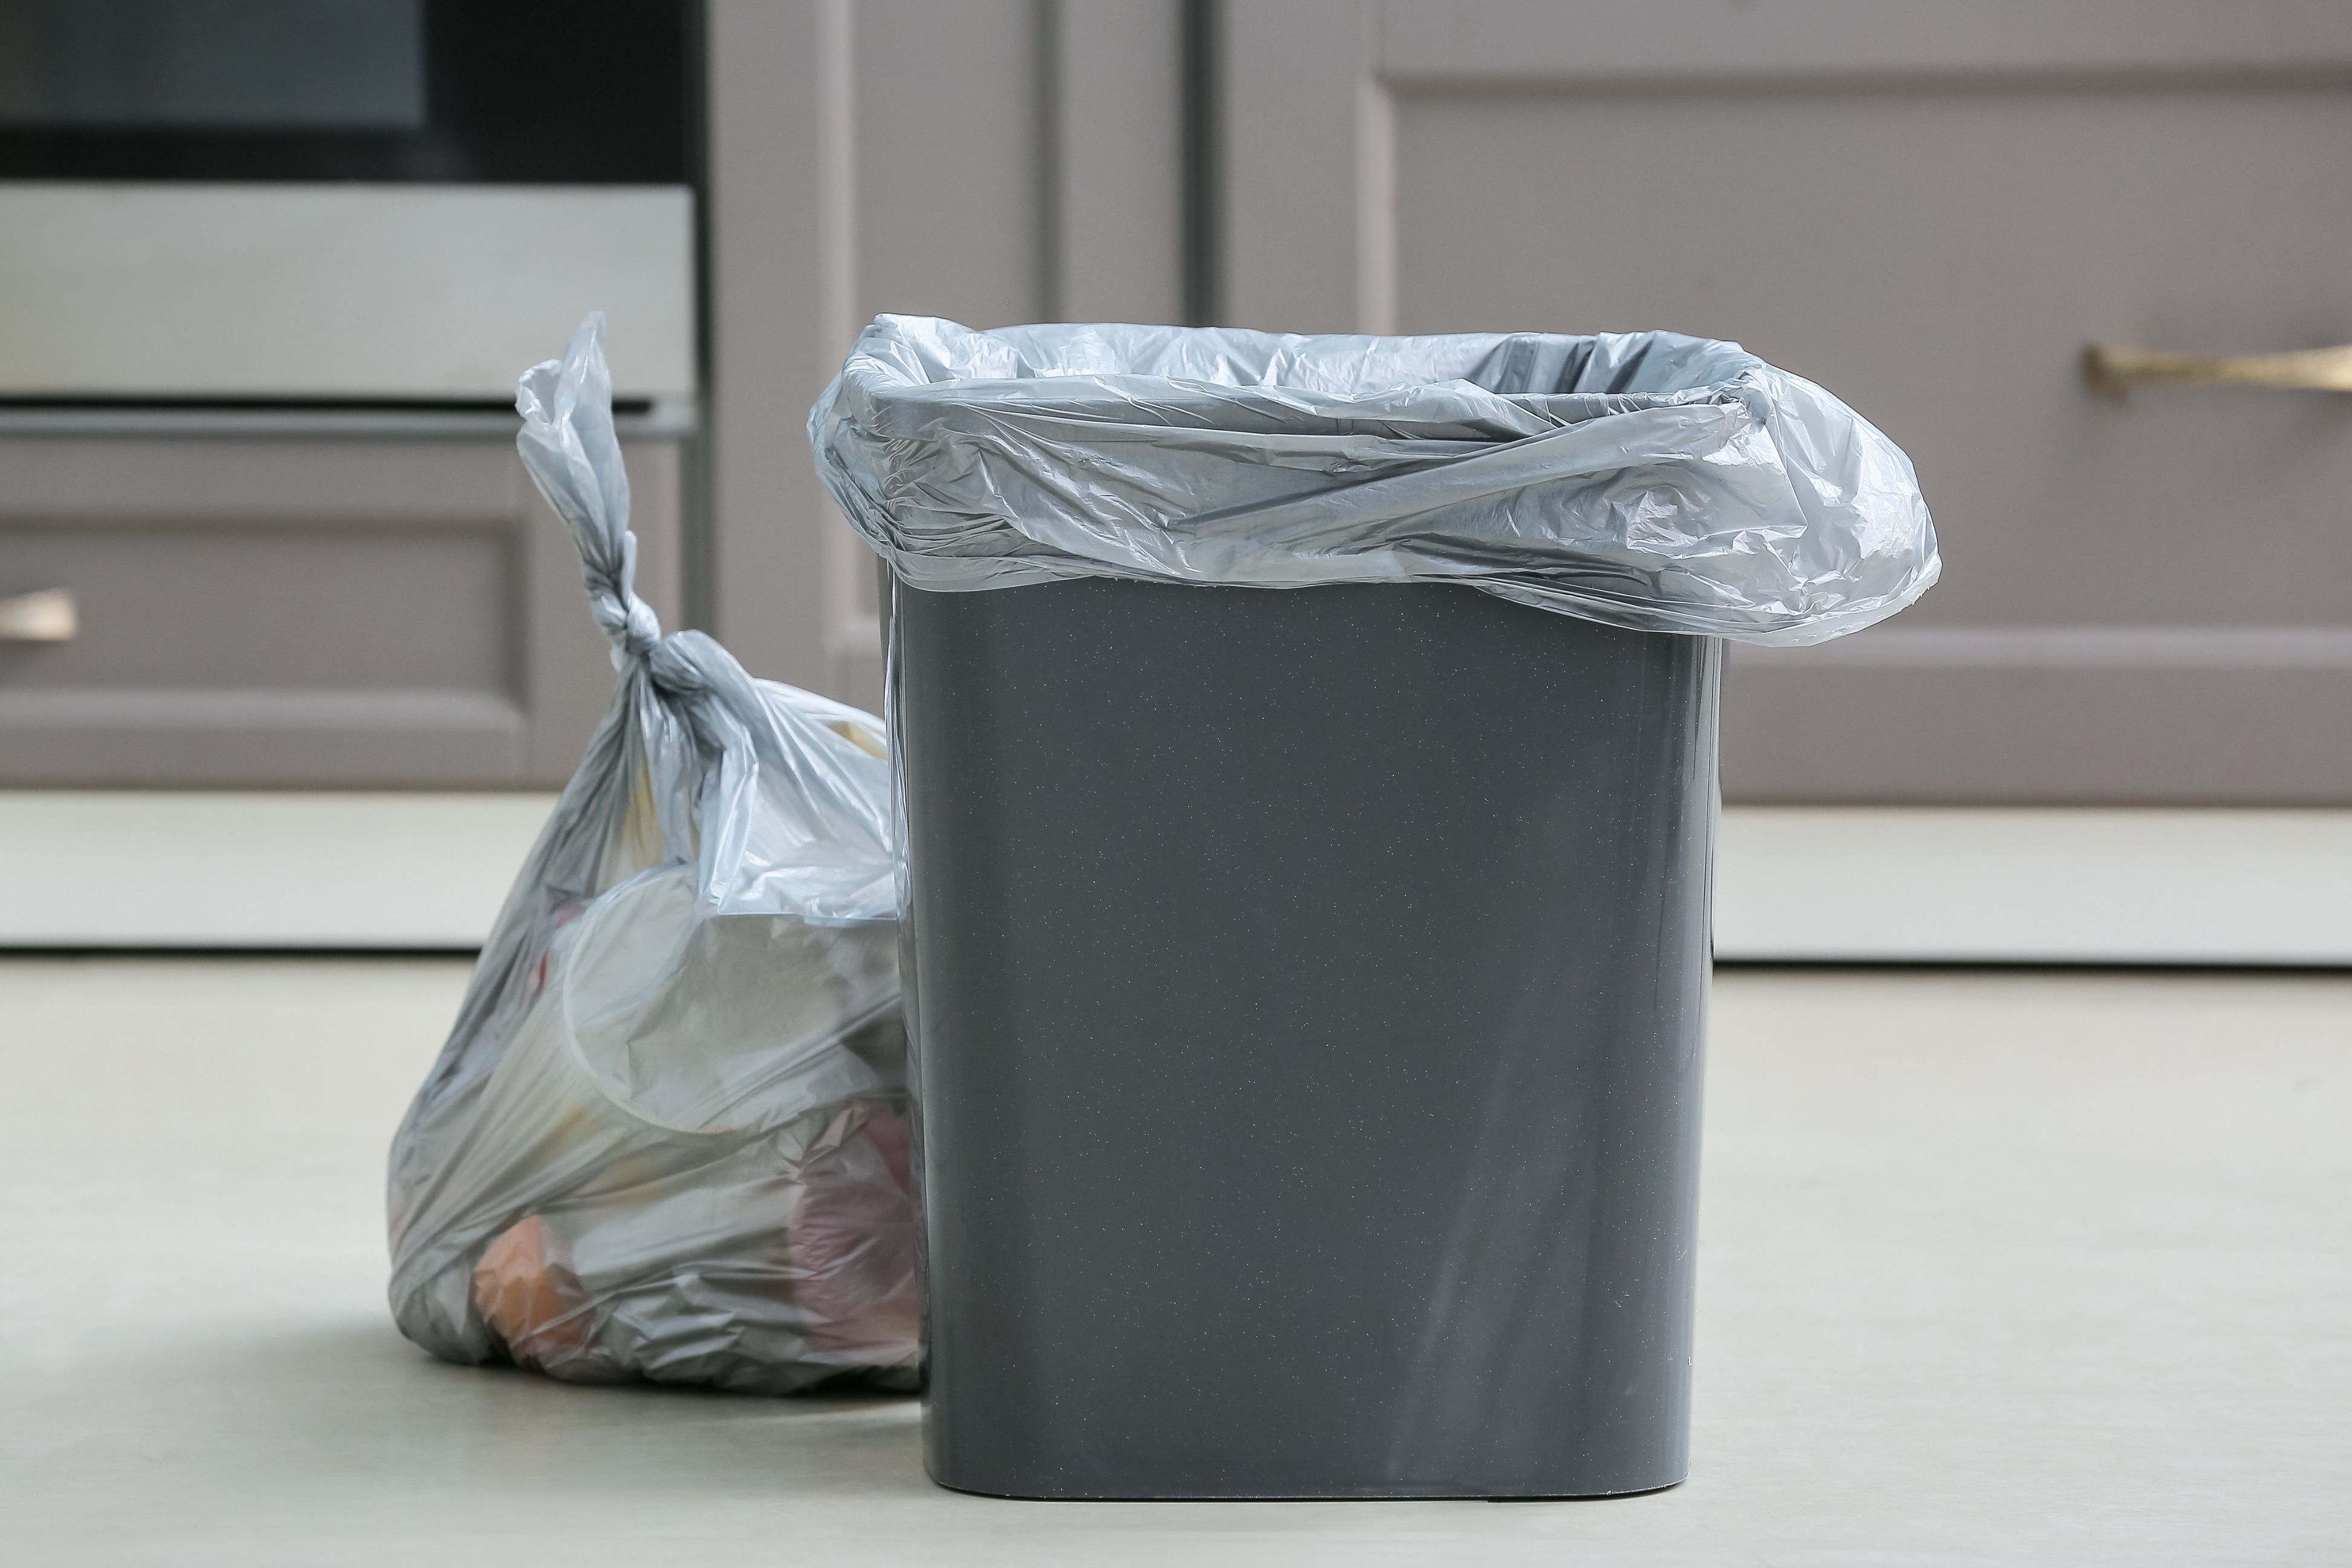 Household trash can with a full clear garbage bag beside